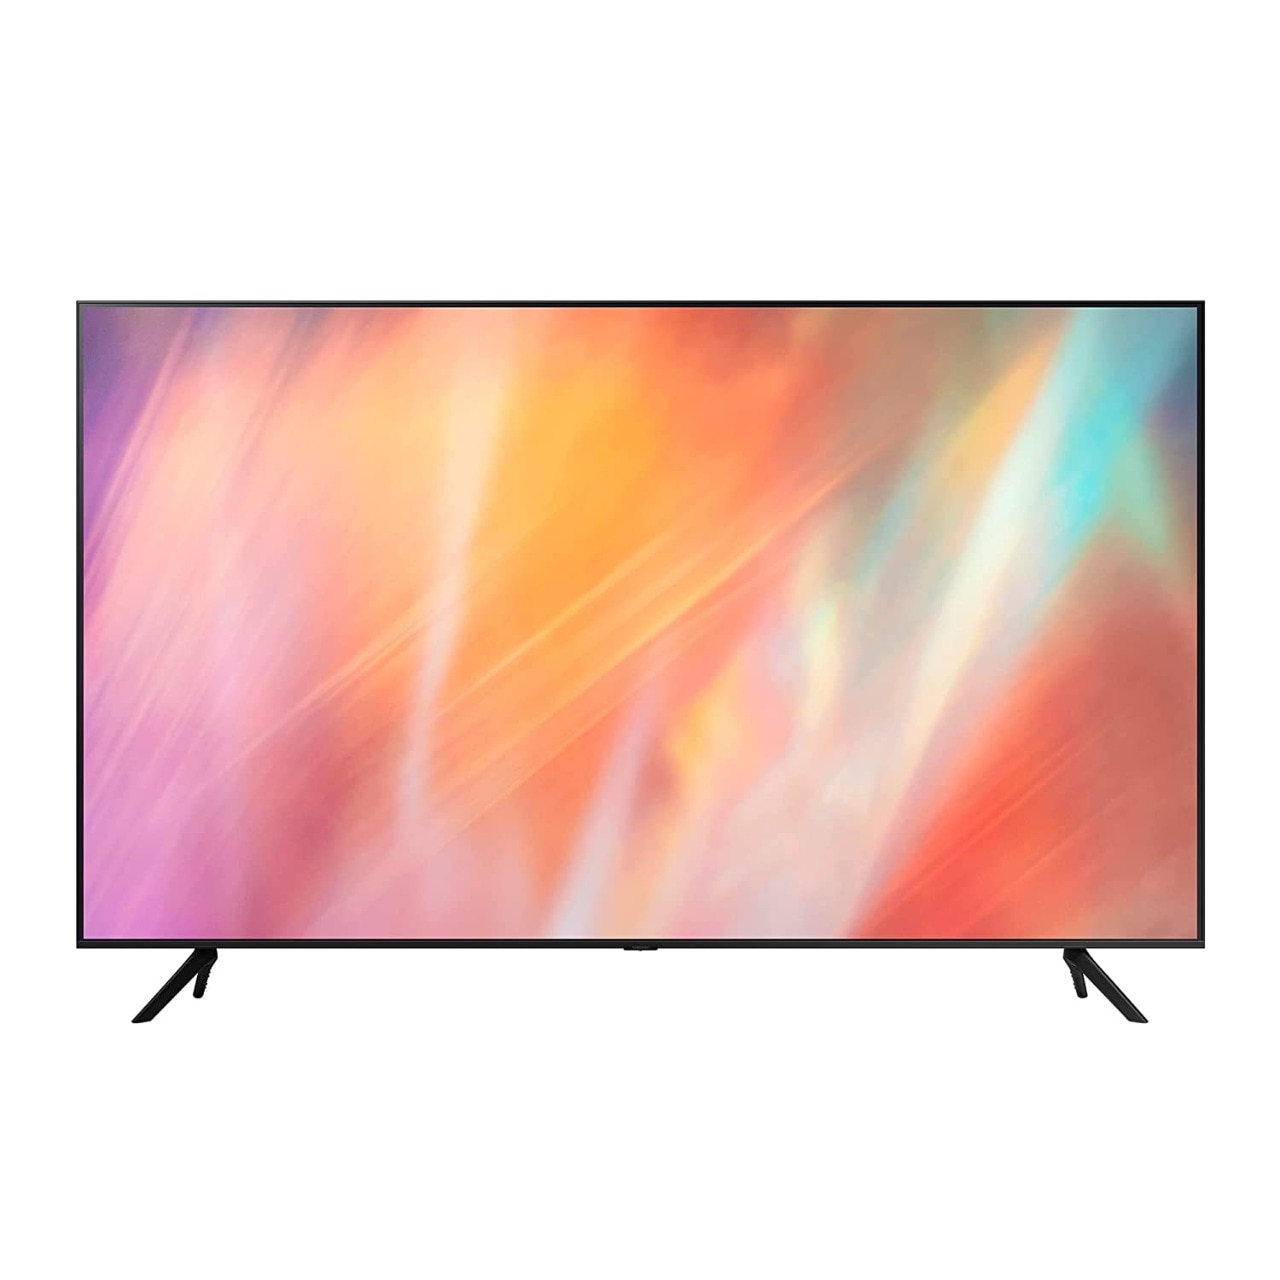 Amazon Great Indian Festival Sale: Samsung 55 Inch Smart TV will not be available this cheap again, buy it on Amazon for less than 50 thousand